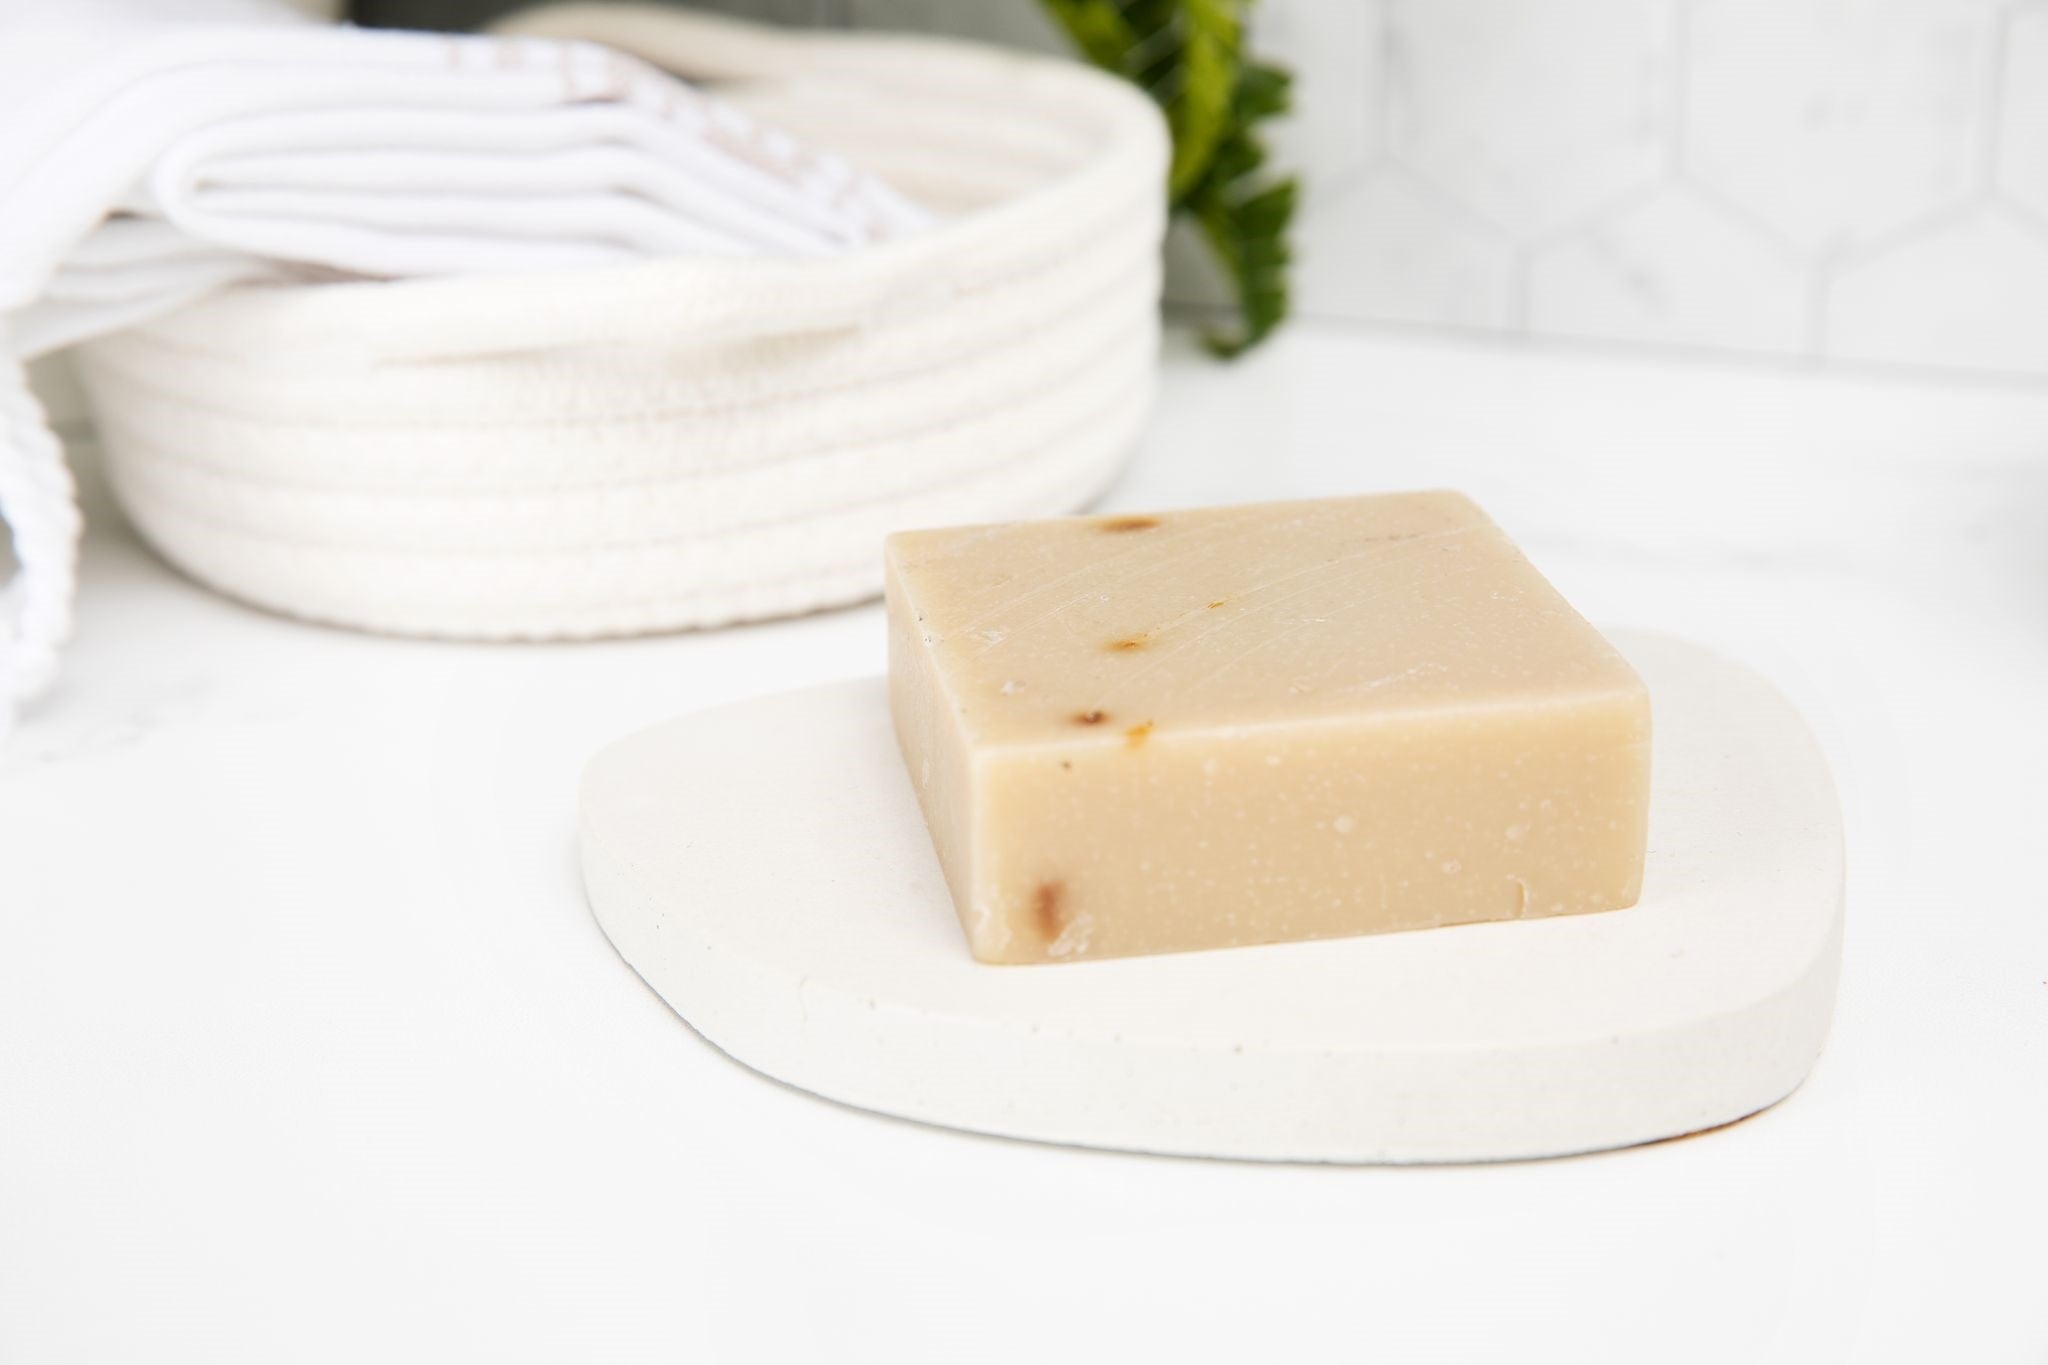 Suds Session: 10 Benefits of Using CBD Soaps - Tub Therapy